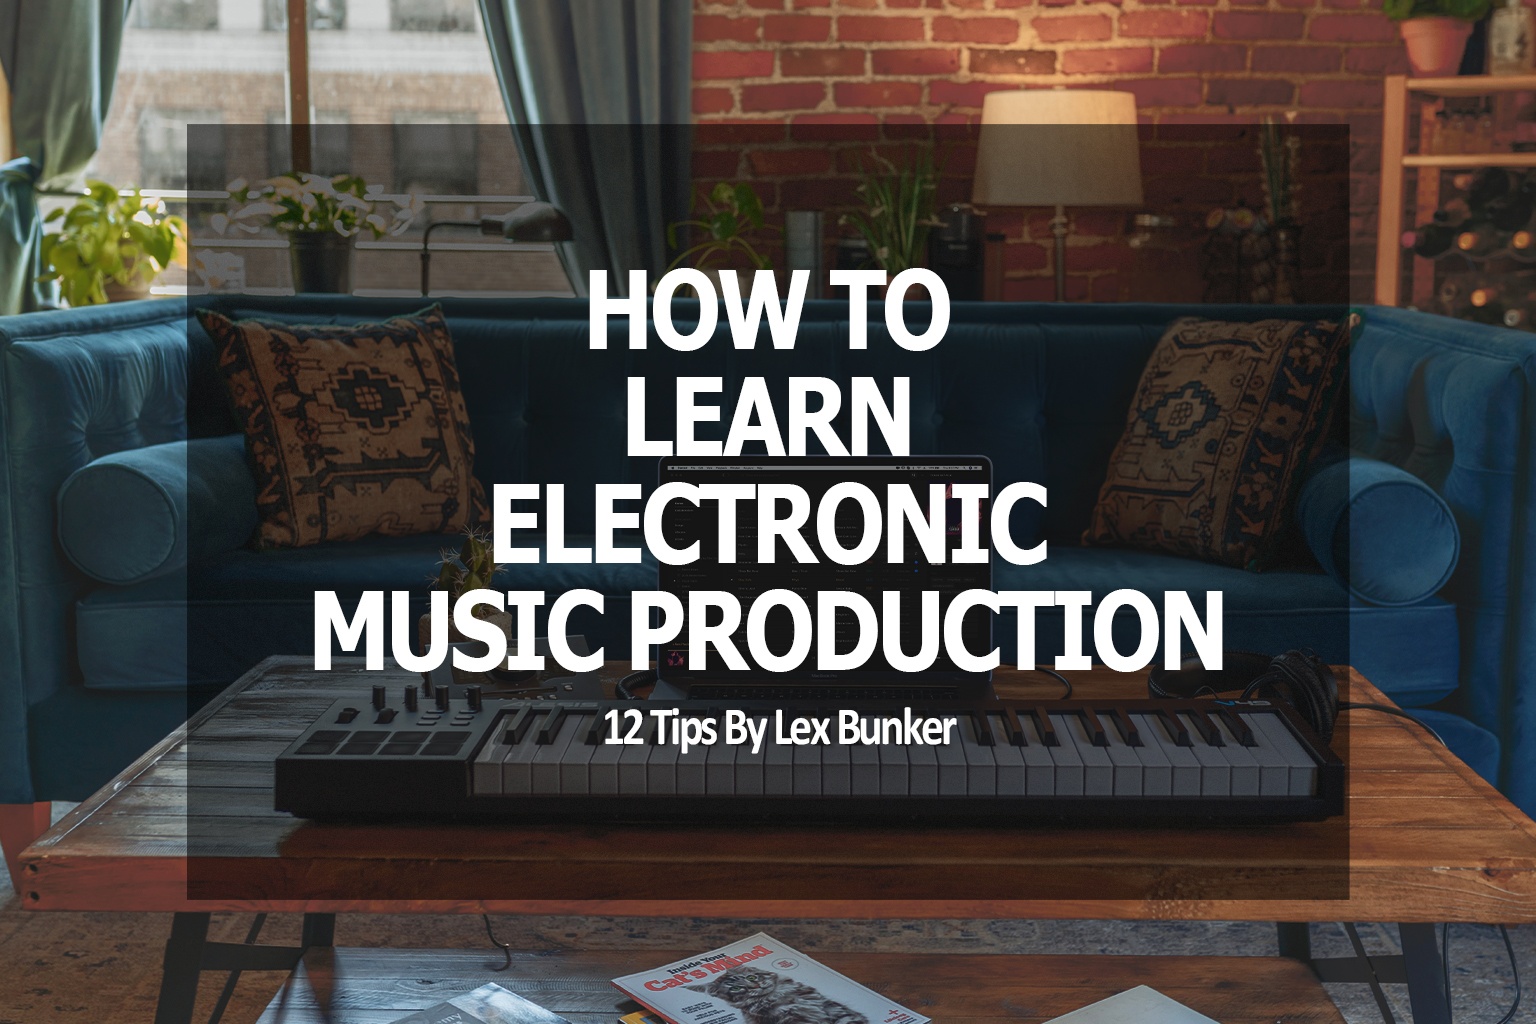 How To Learn Electronic Music Production | 12 Tips By Lex Bunker